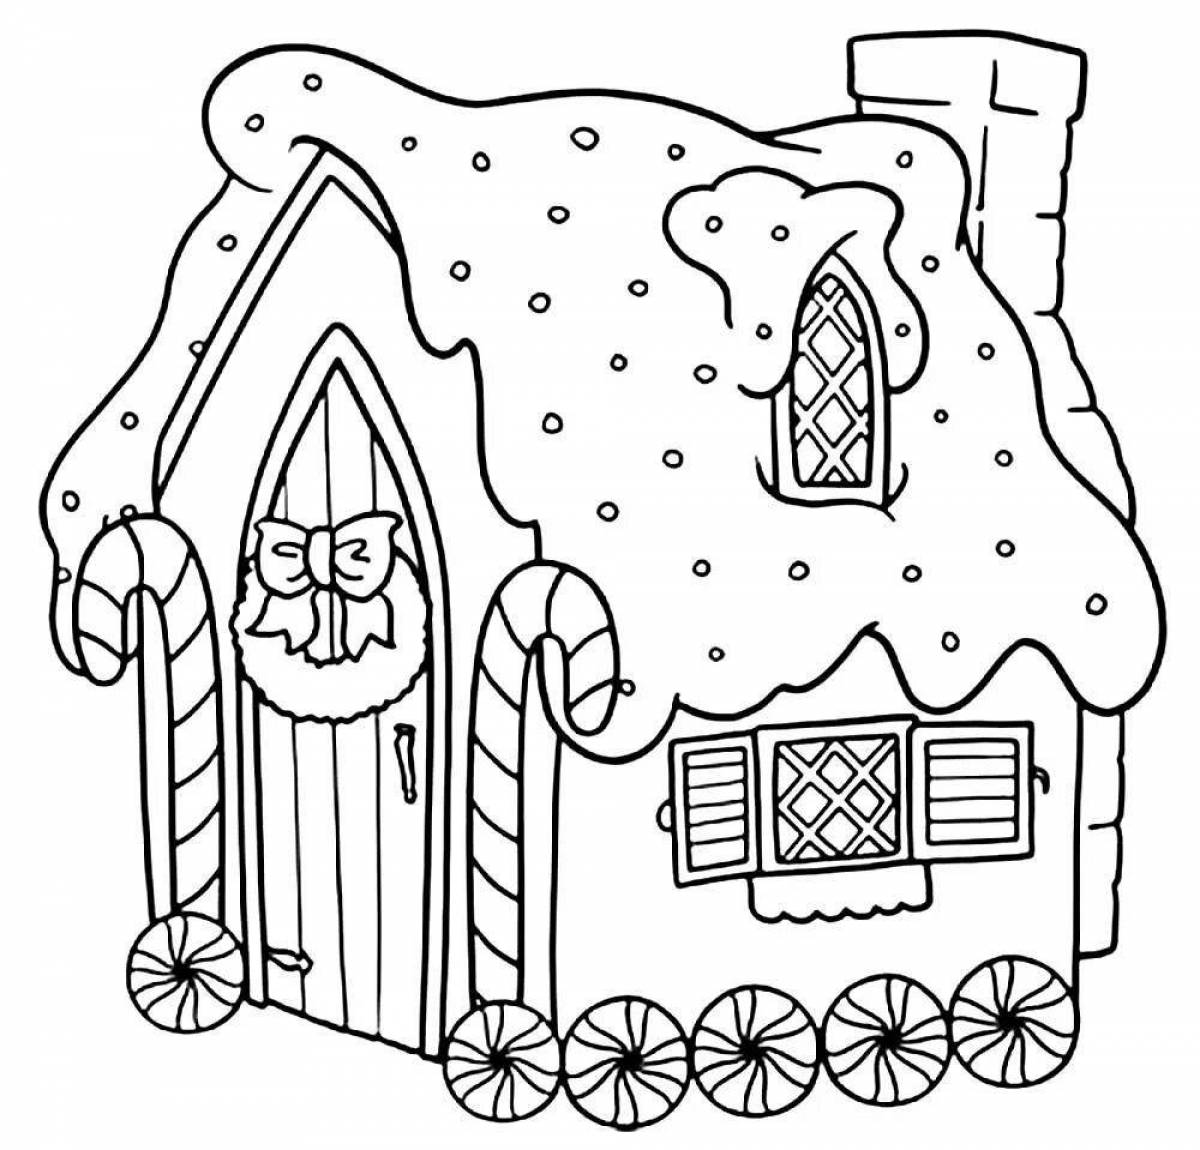 Gingerbread house for kids #1